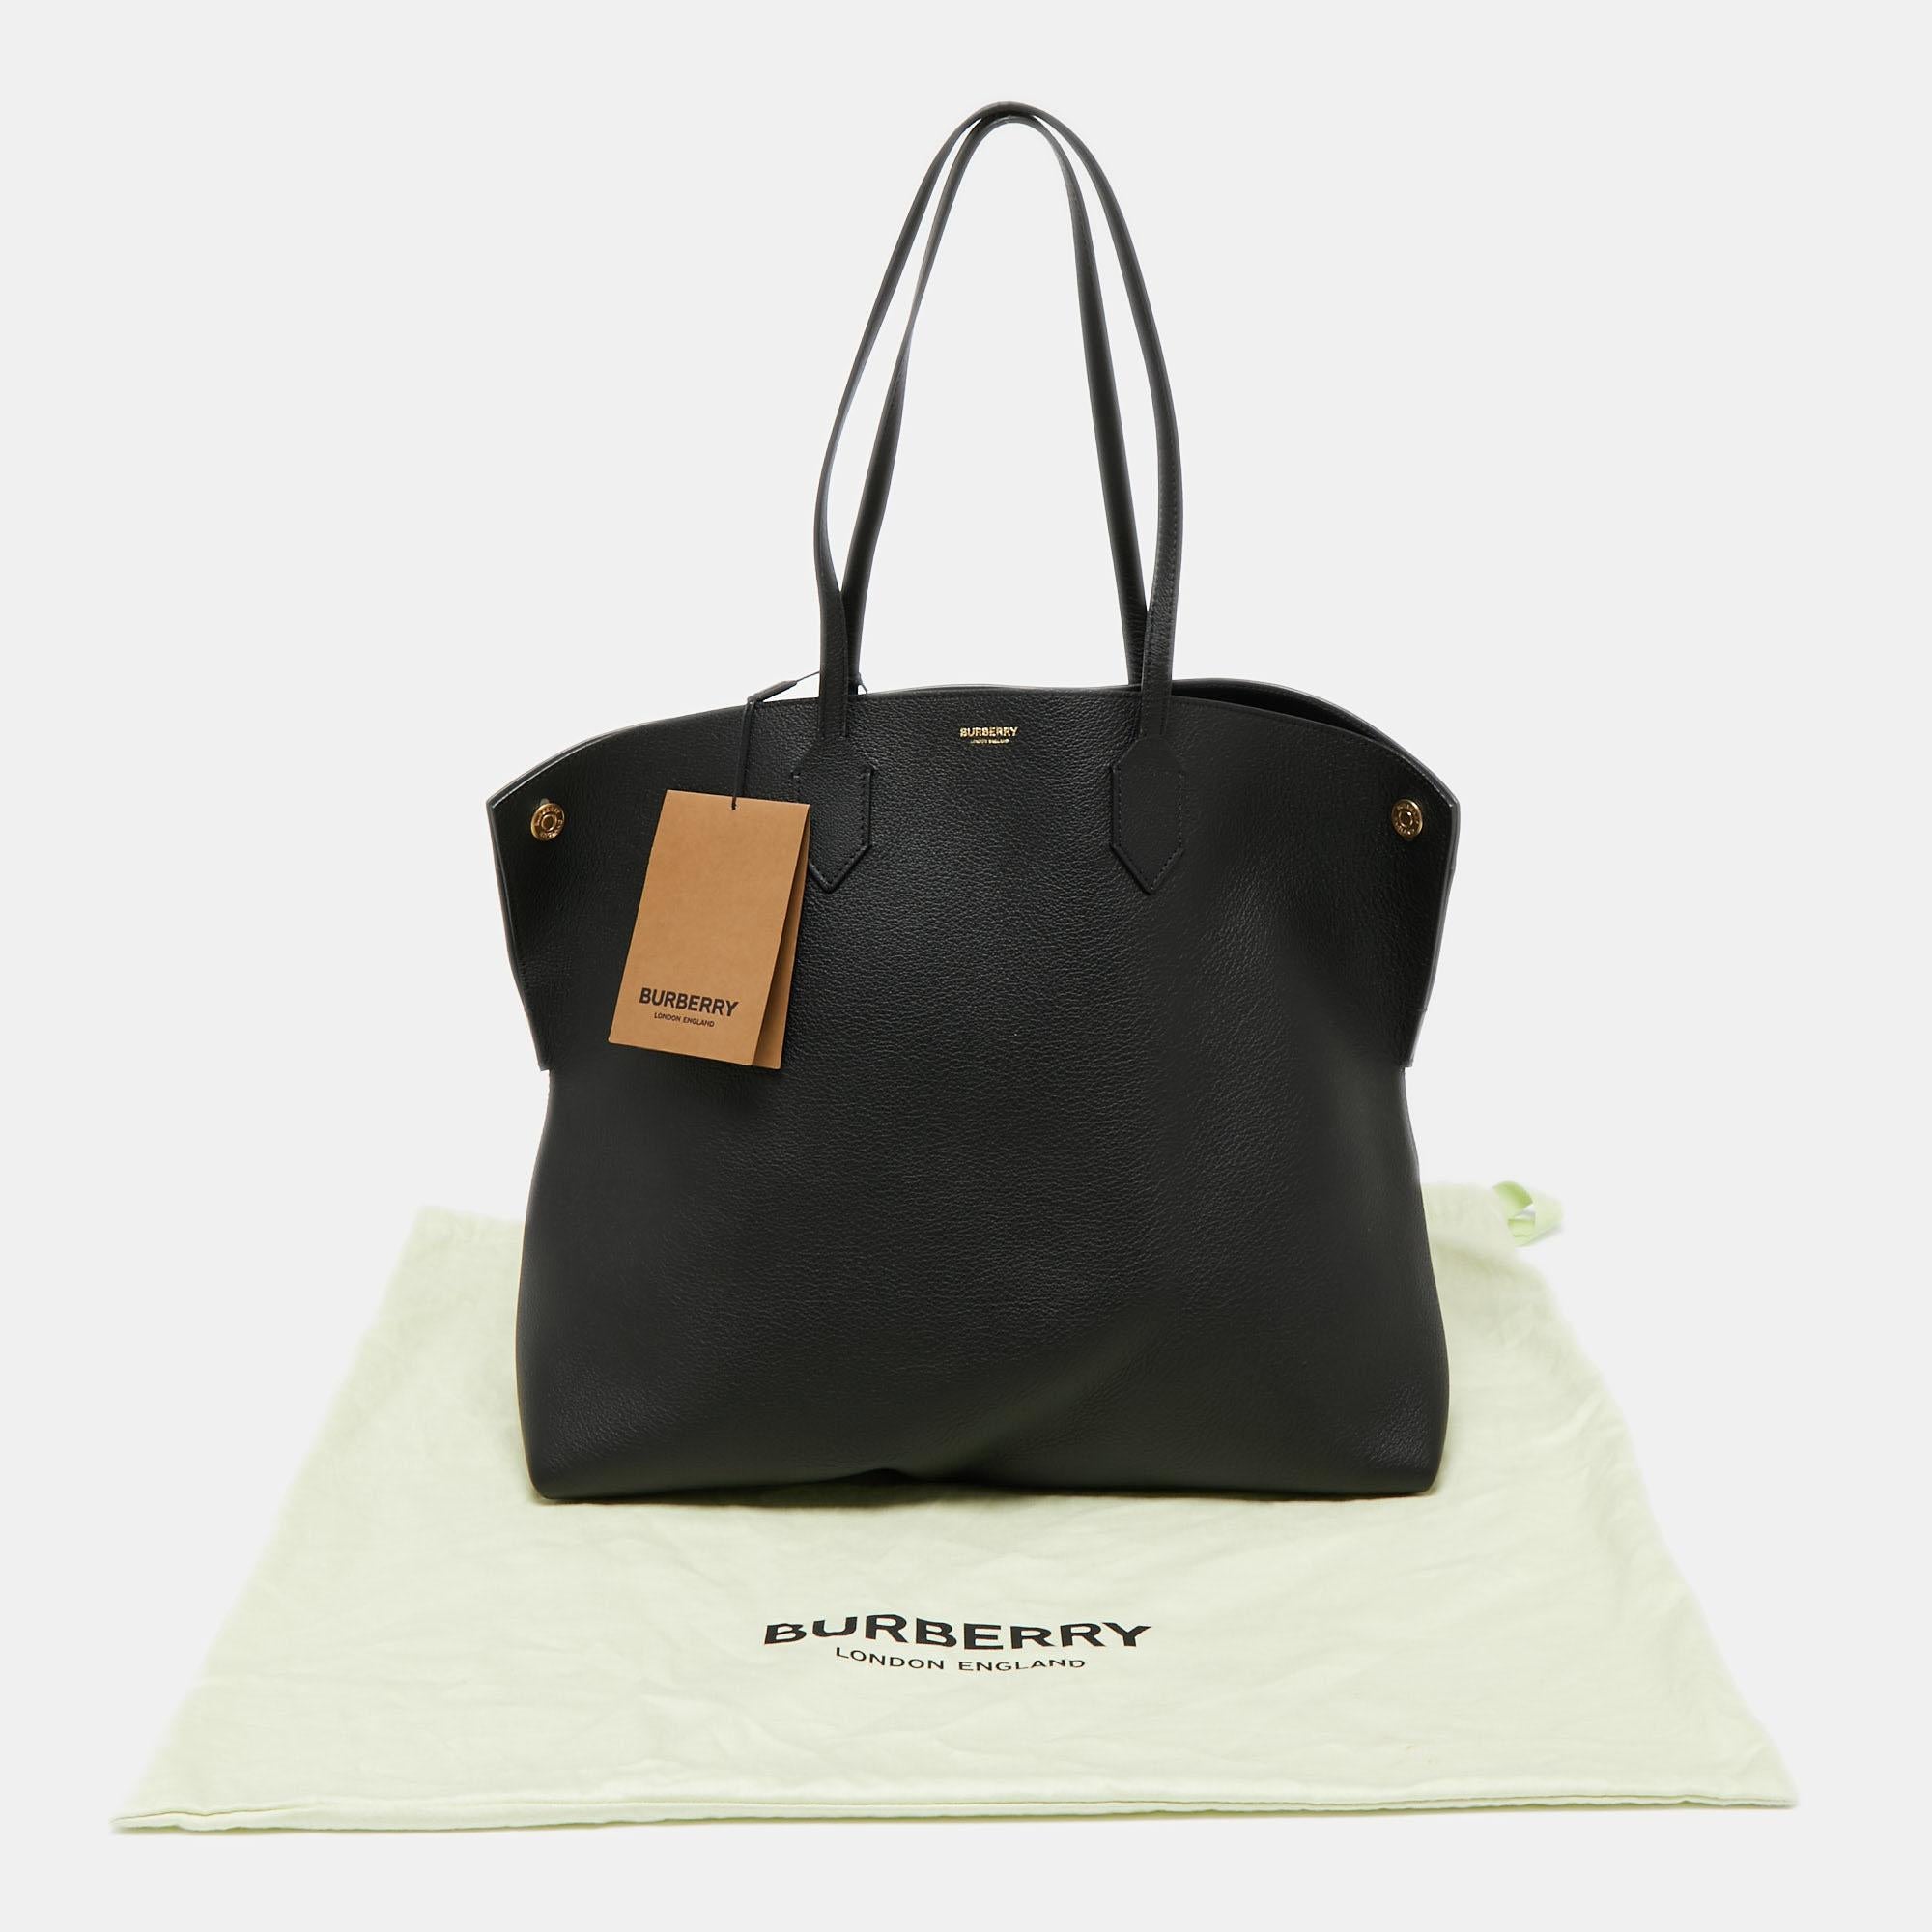 Burberry Black Leather Large Society Tote 7